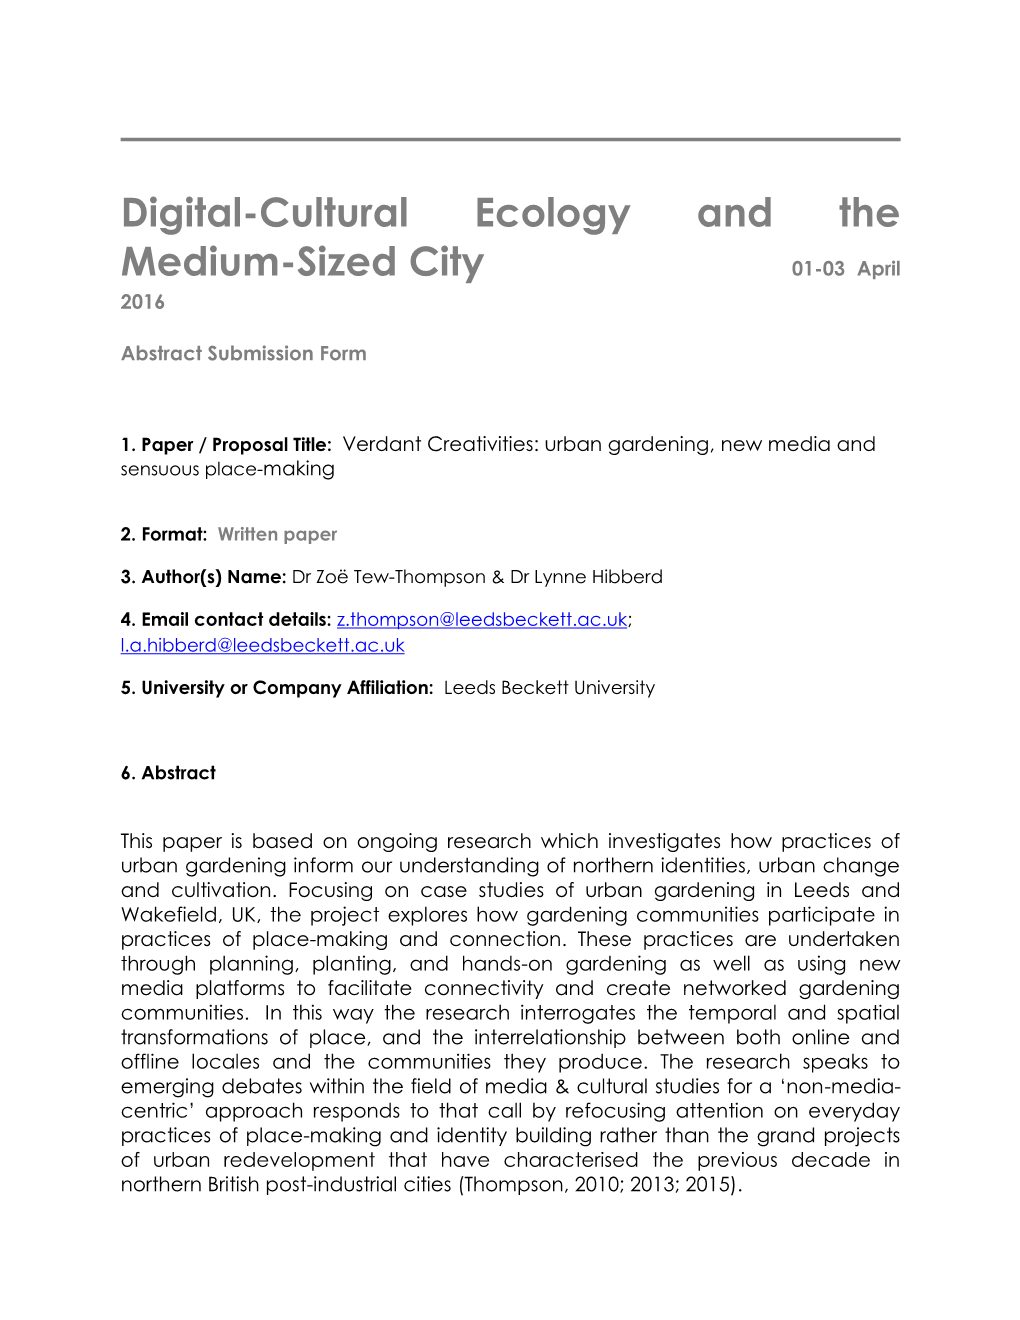 Digital-Cultural Ecology and the Medium-Sized City